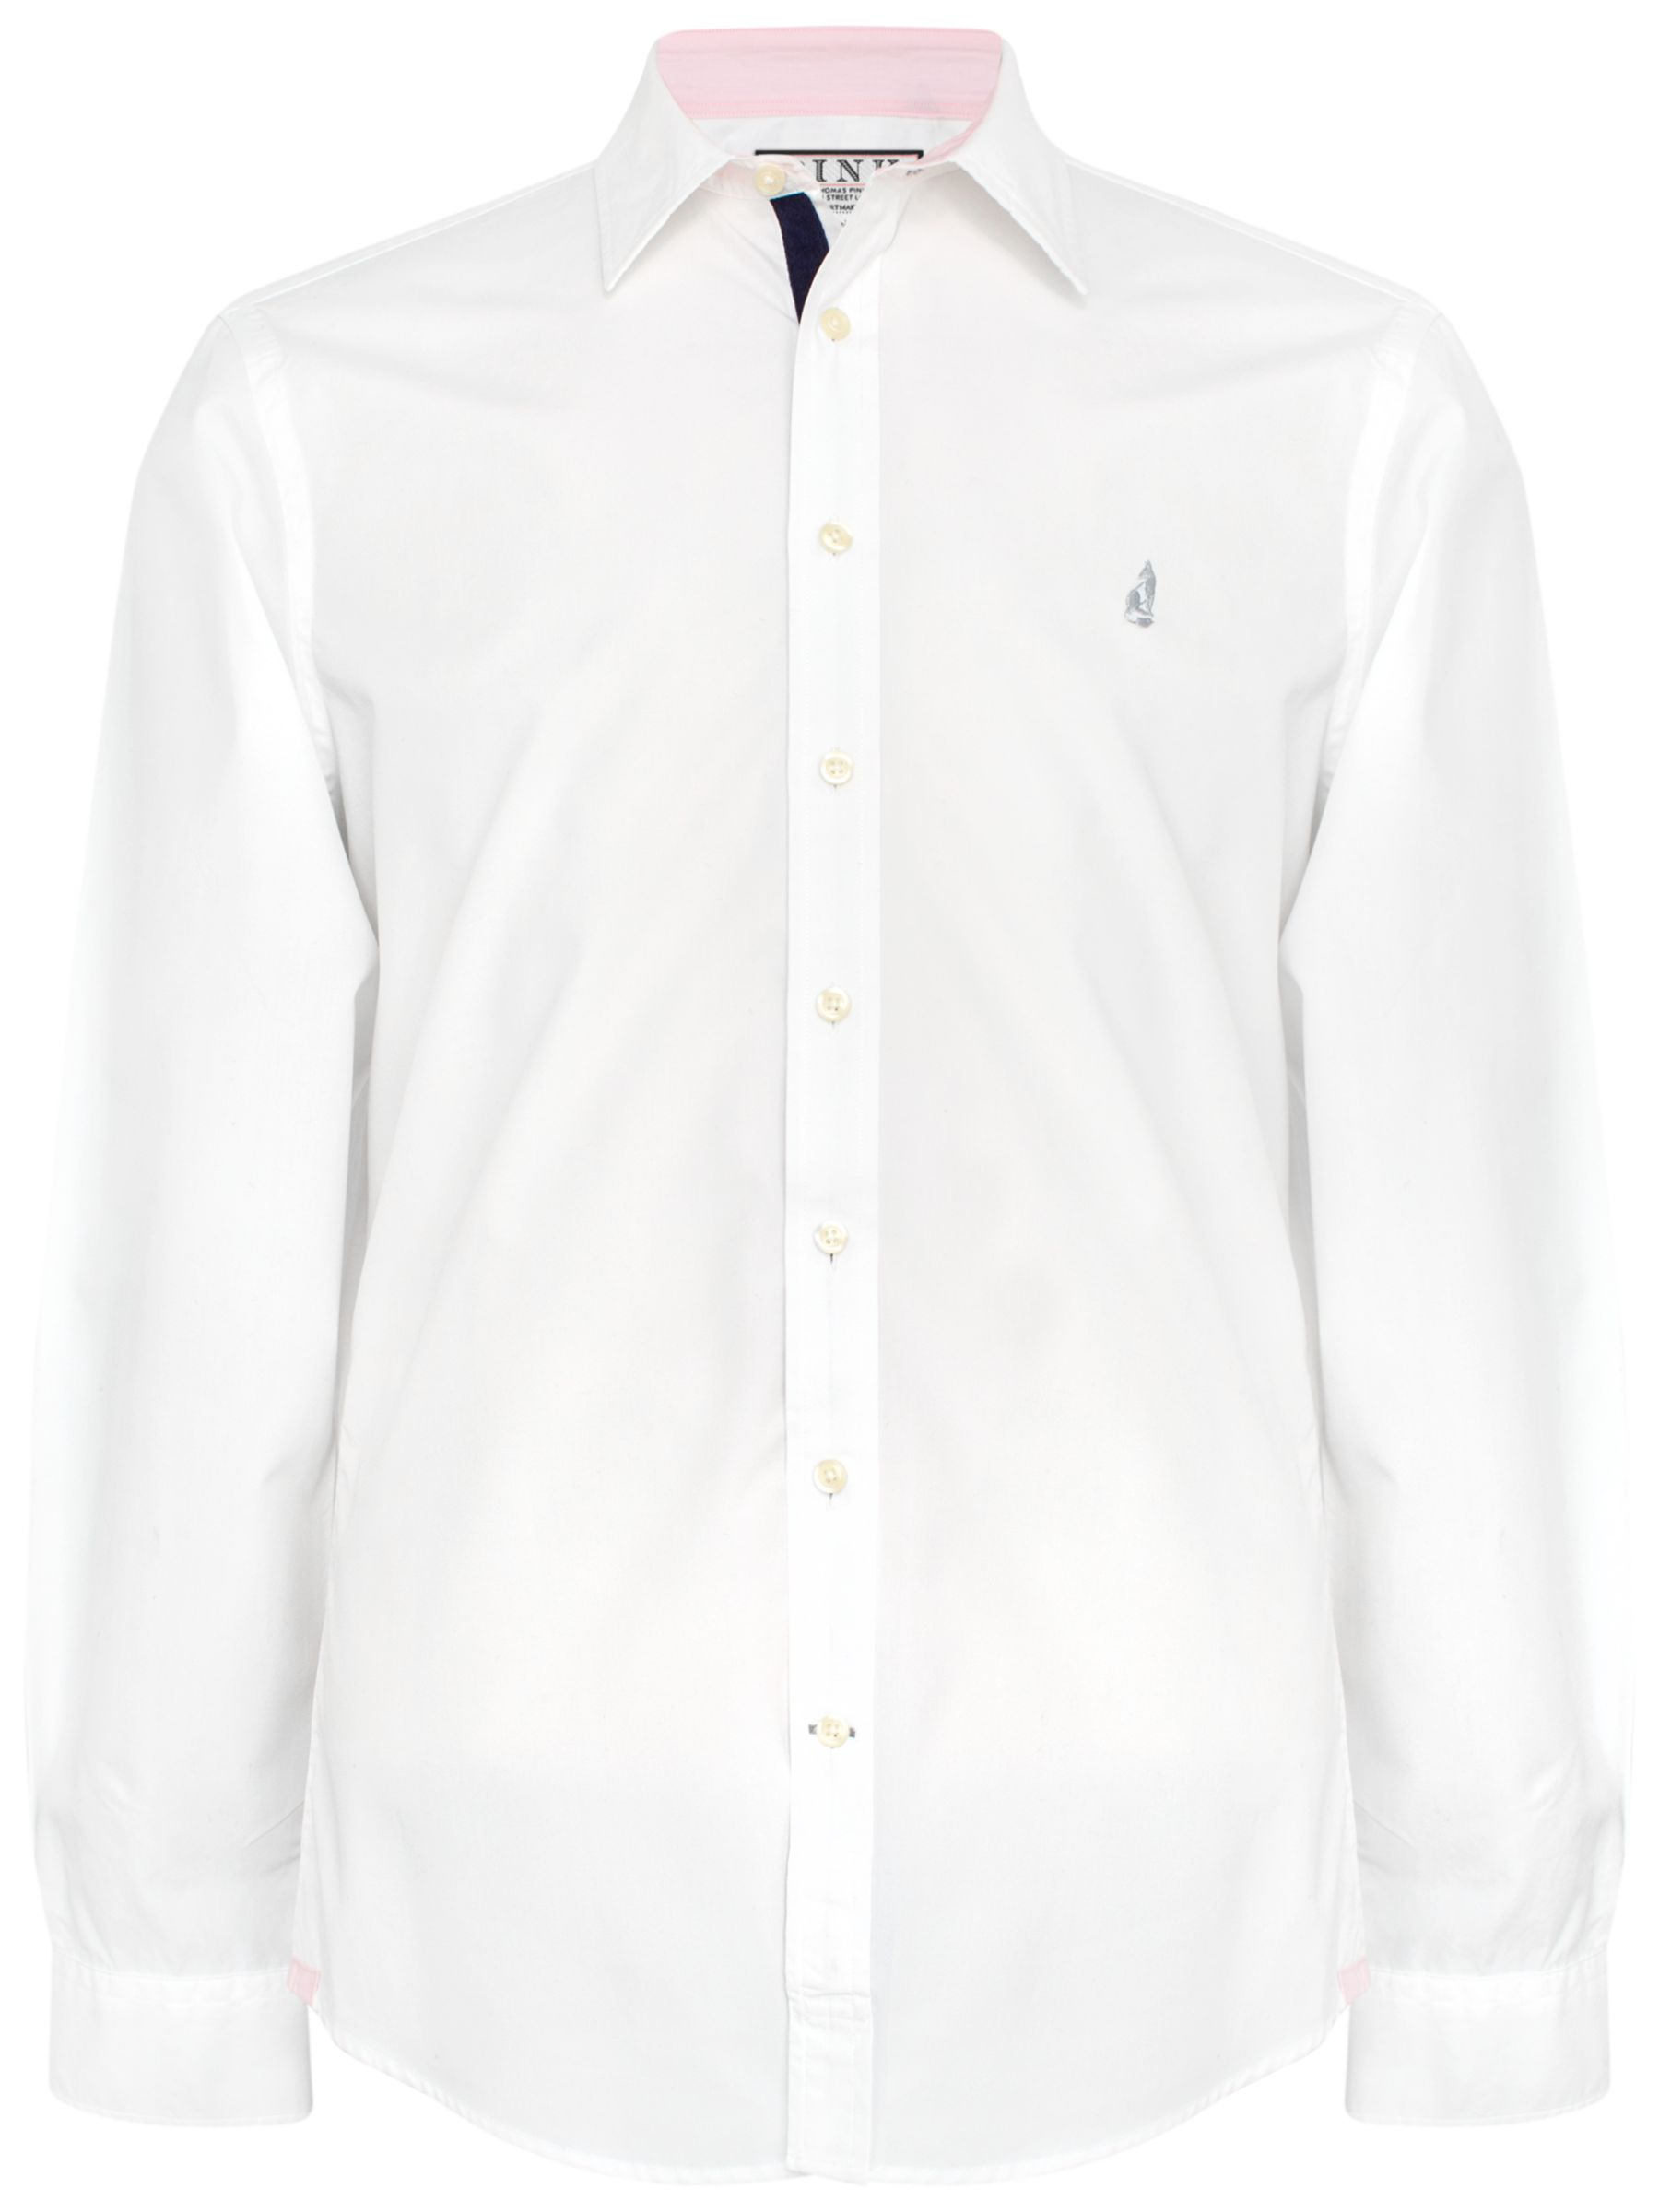 Thomas Pink Snell Plain Classic Fit Shirt, White at John Lewis & Partners